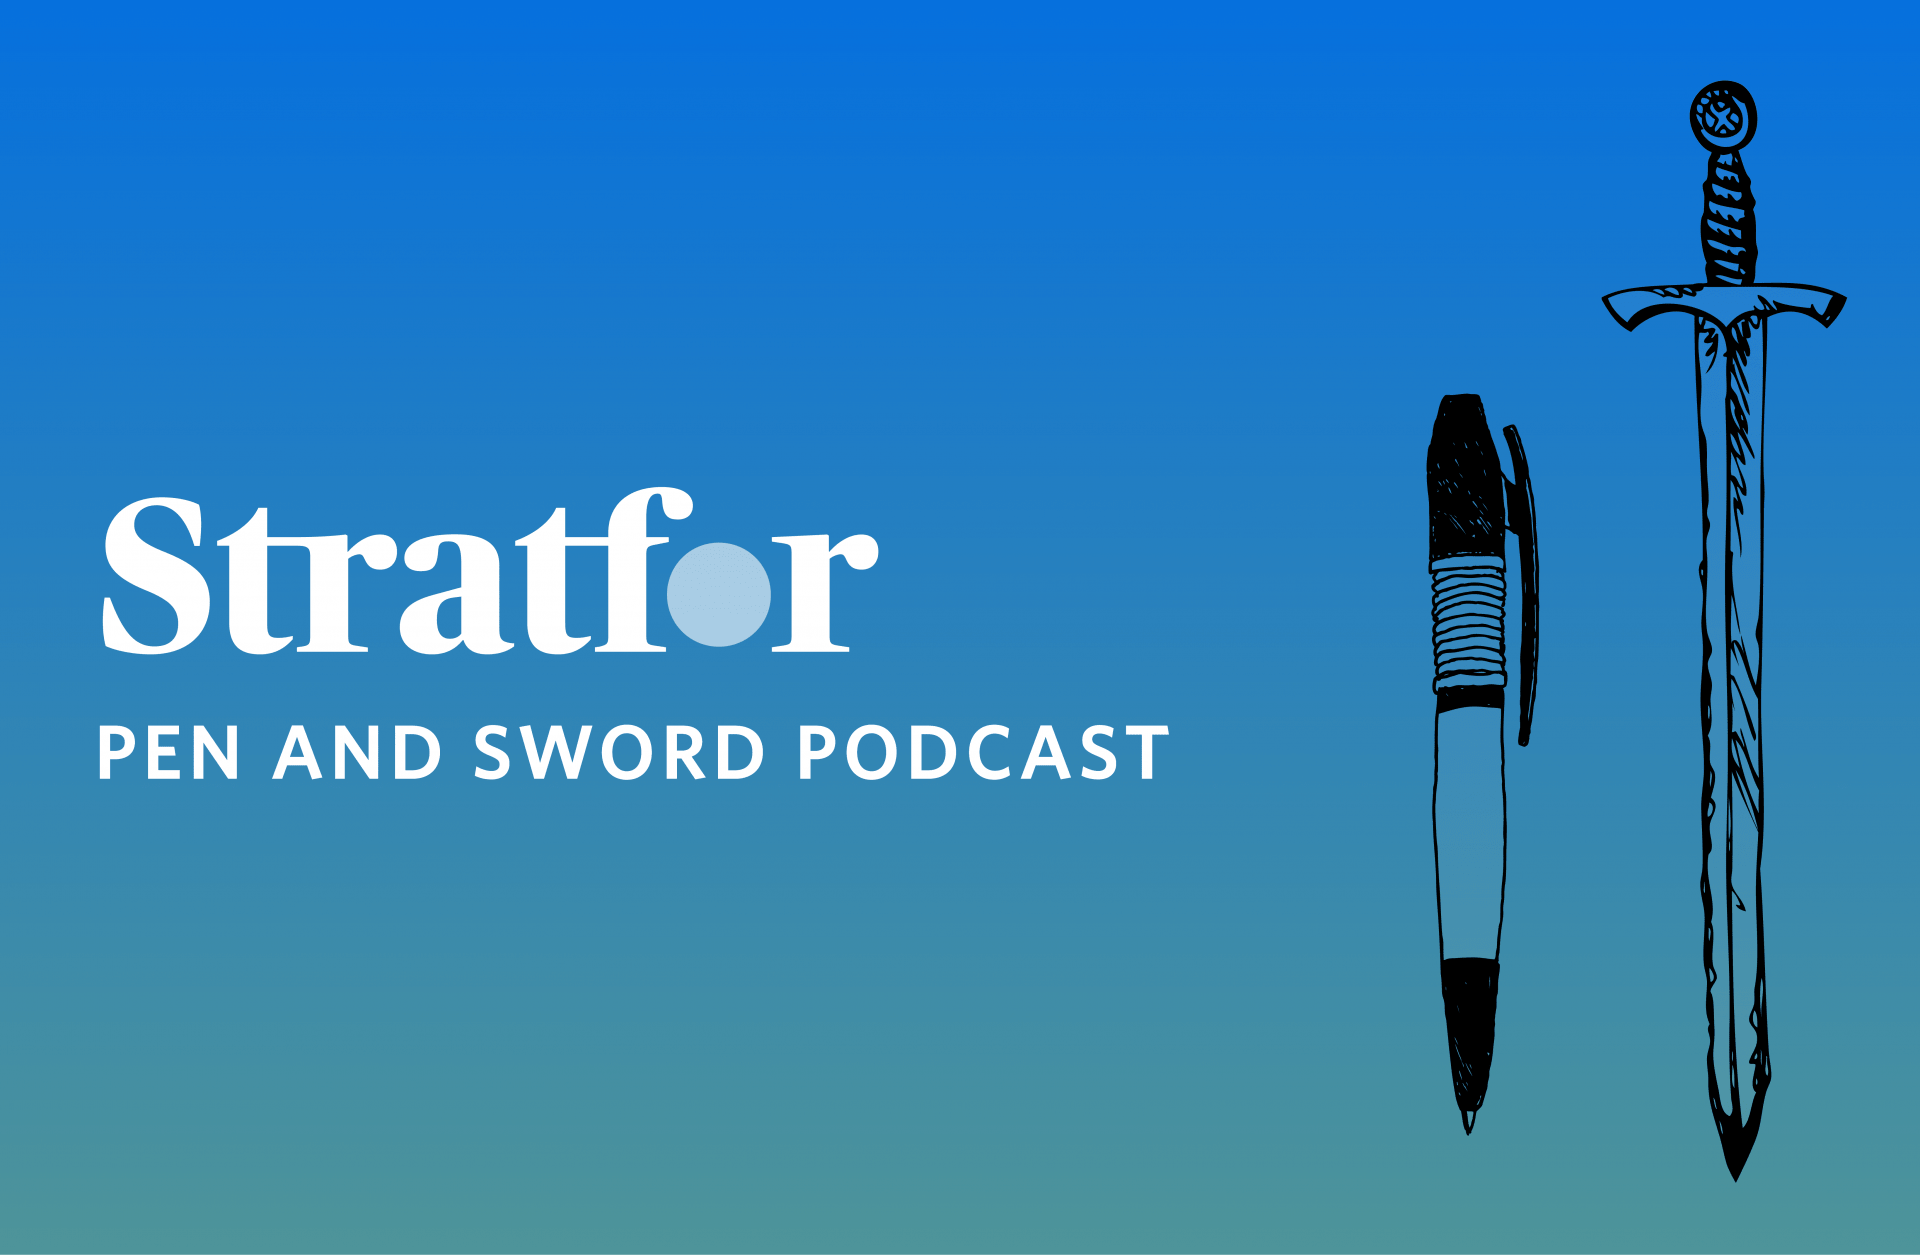 Stratfor's Top 10 Pen and Sword Podcasts of 2019